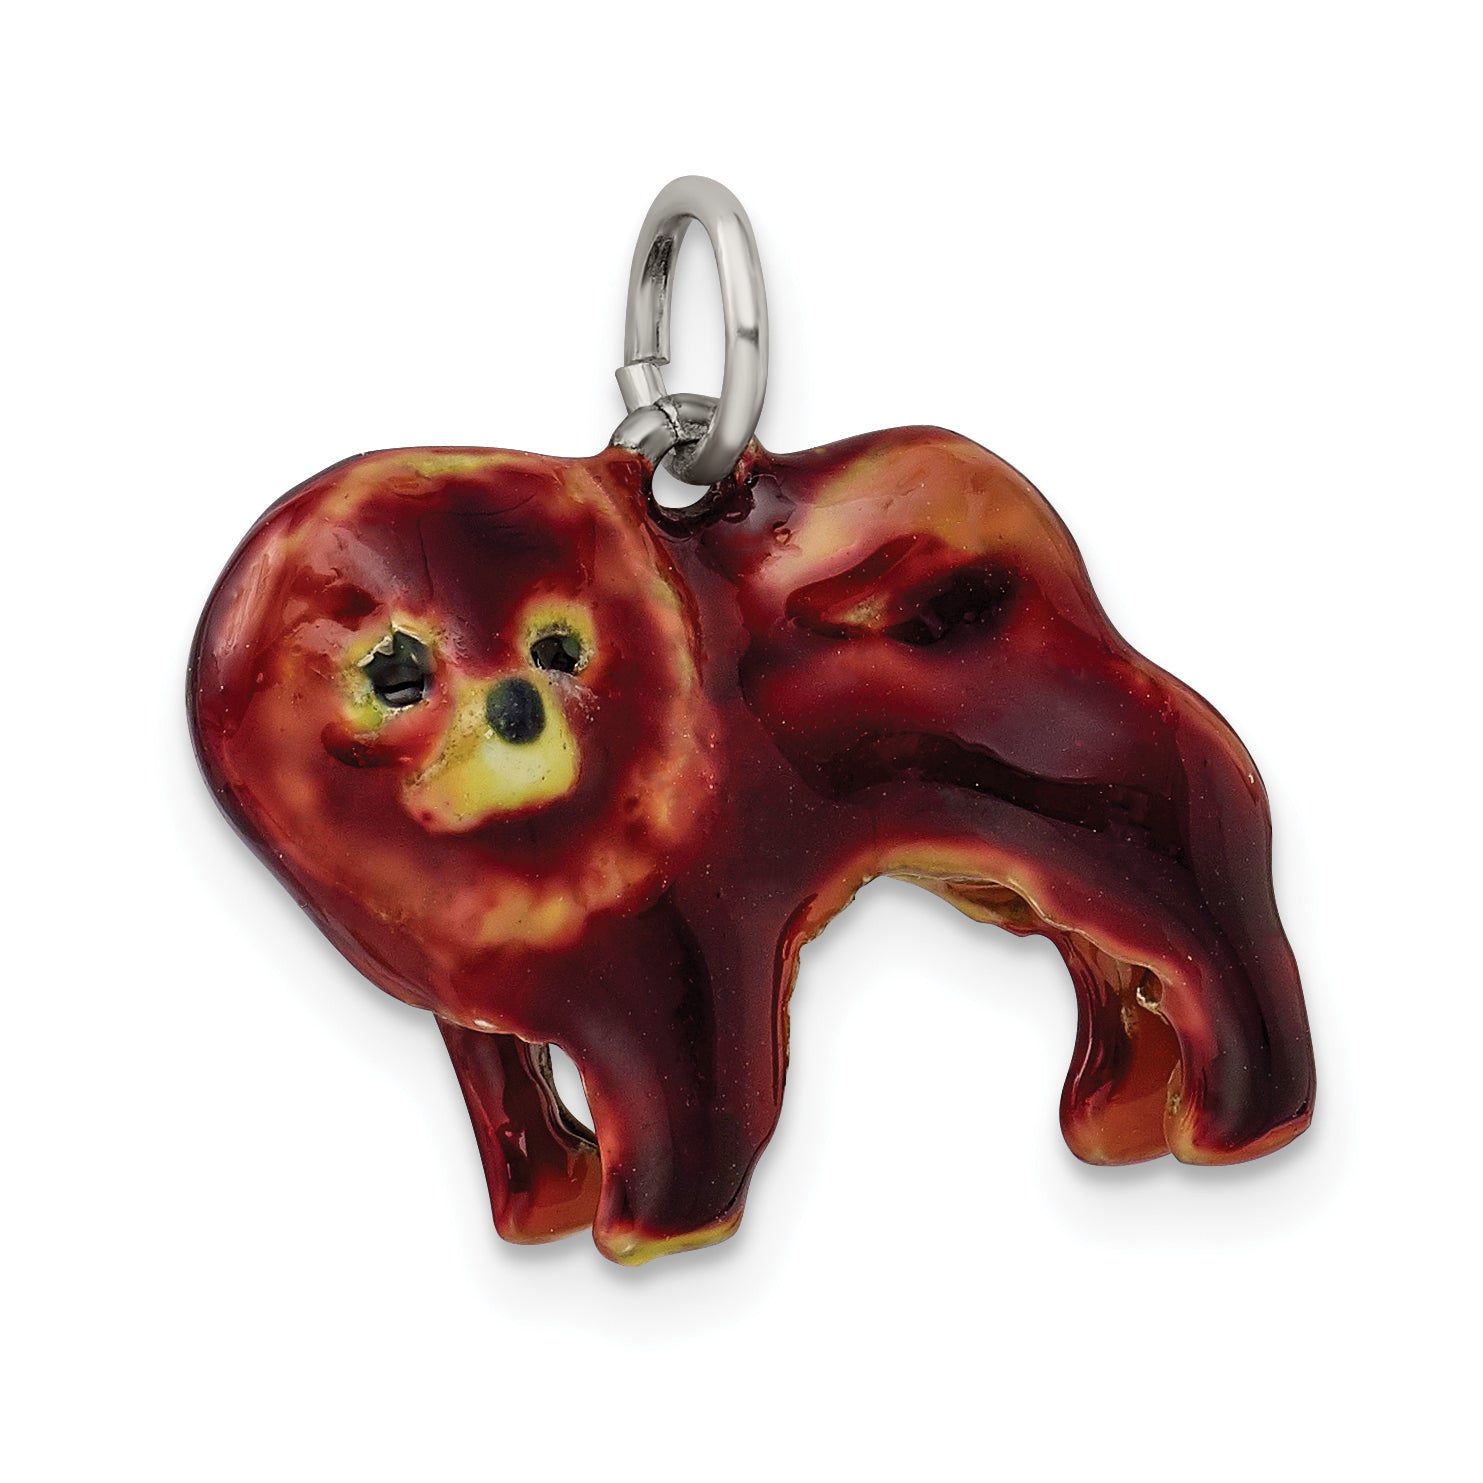 Sterling Silver Enameled Chow Dog Charm